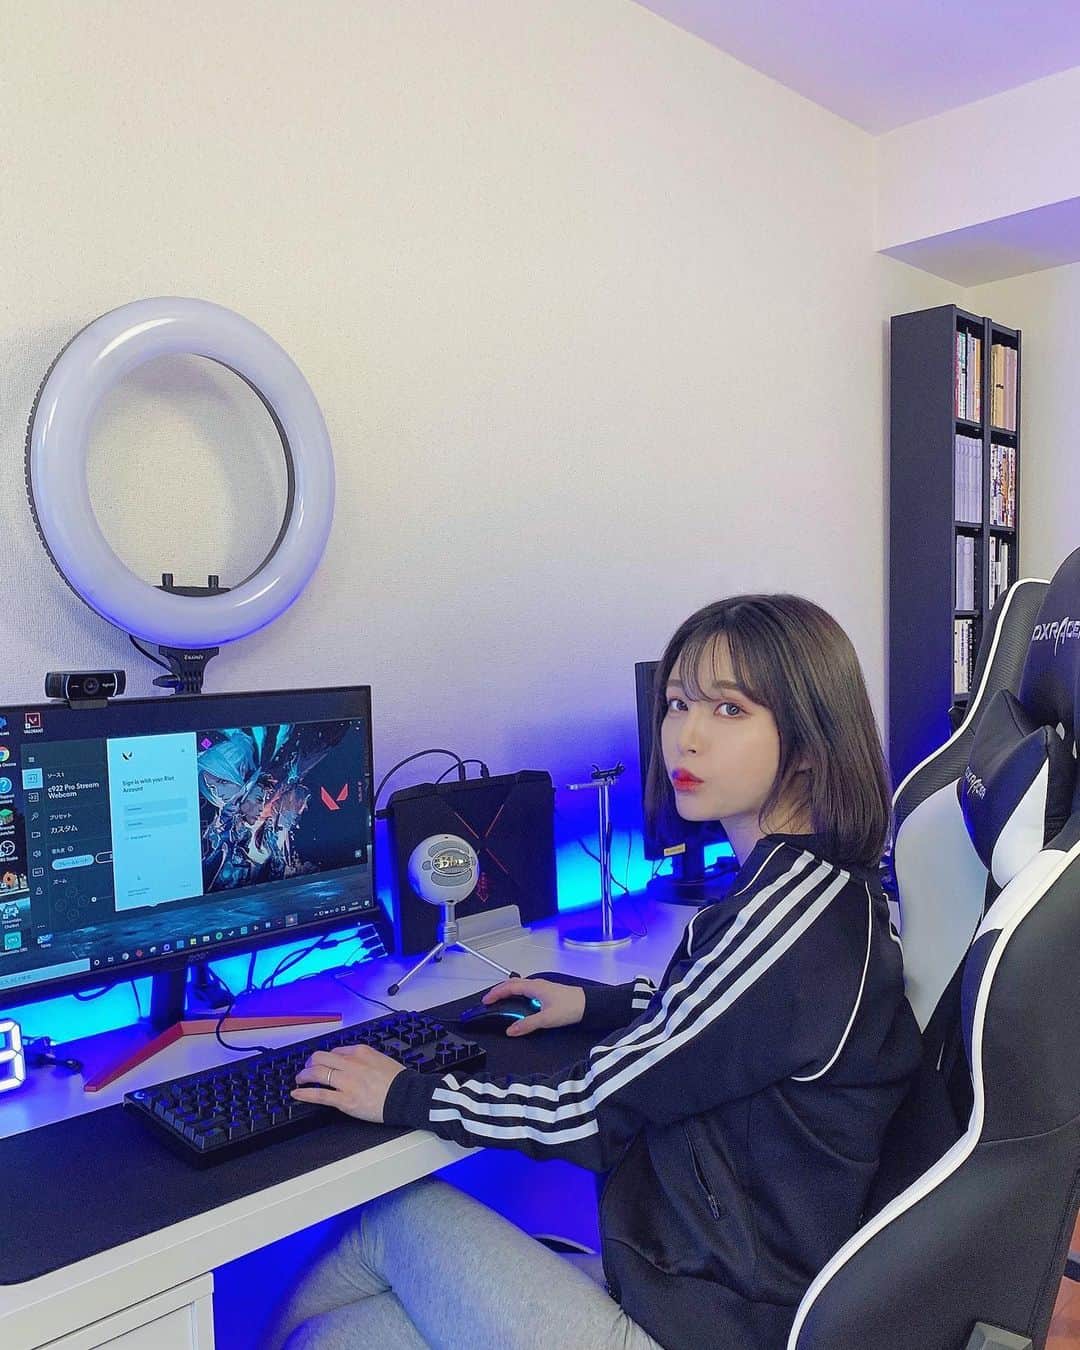 Rabiのインスタグラム：「I’ve been practicing everyday because I just want to get better. Baby steps can keep you moving towards your goal.💜 _______________________________________ #dxracer #gamergirl  #japanesegirl﻿ #gamingchair﻿ #ゲーミングチェア﻿ #adidas﻿ #threestripes﻿ #3stripes﻿ #adidascasual #데일리﻿ #일본﻿ #일본스냅﻿ #도쿄 ﻿ #생활  #일상﻿ #단발 ﻿ #머리 ﻿」